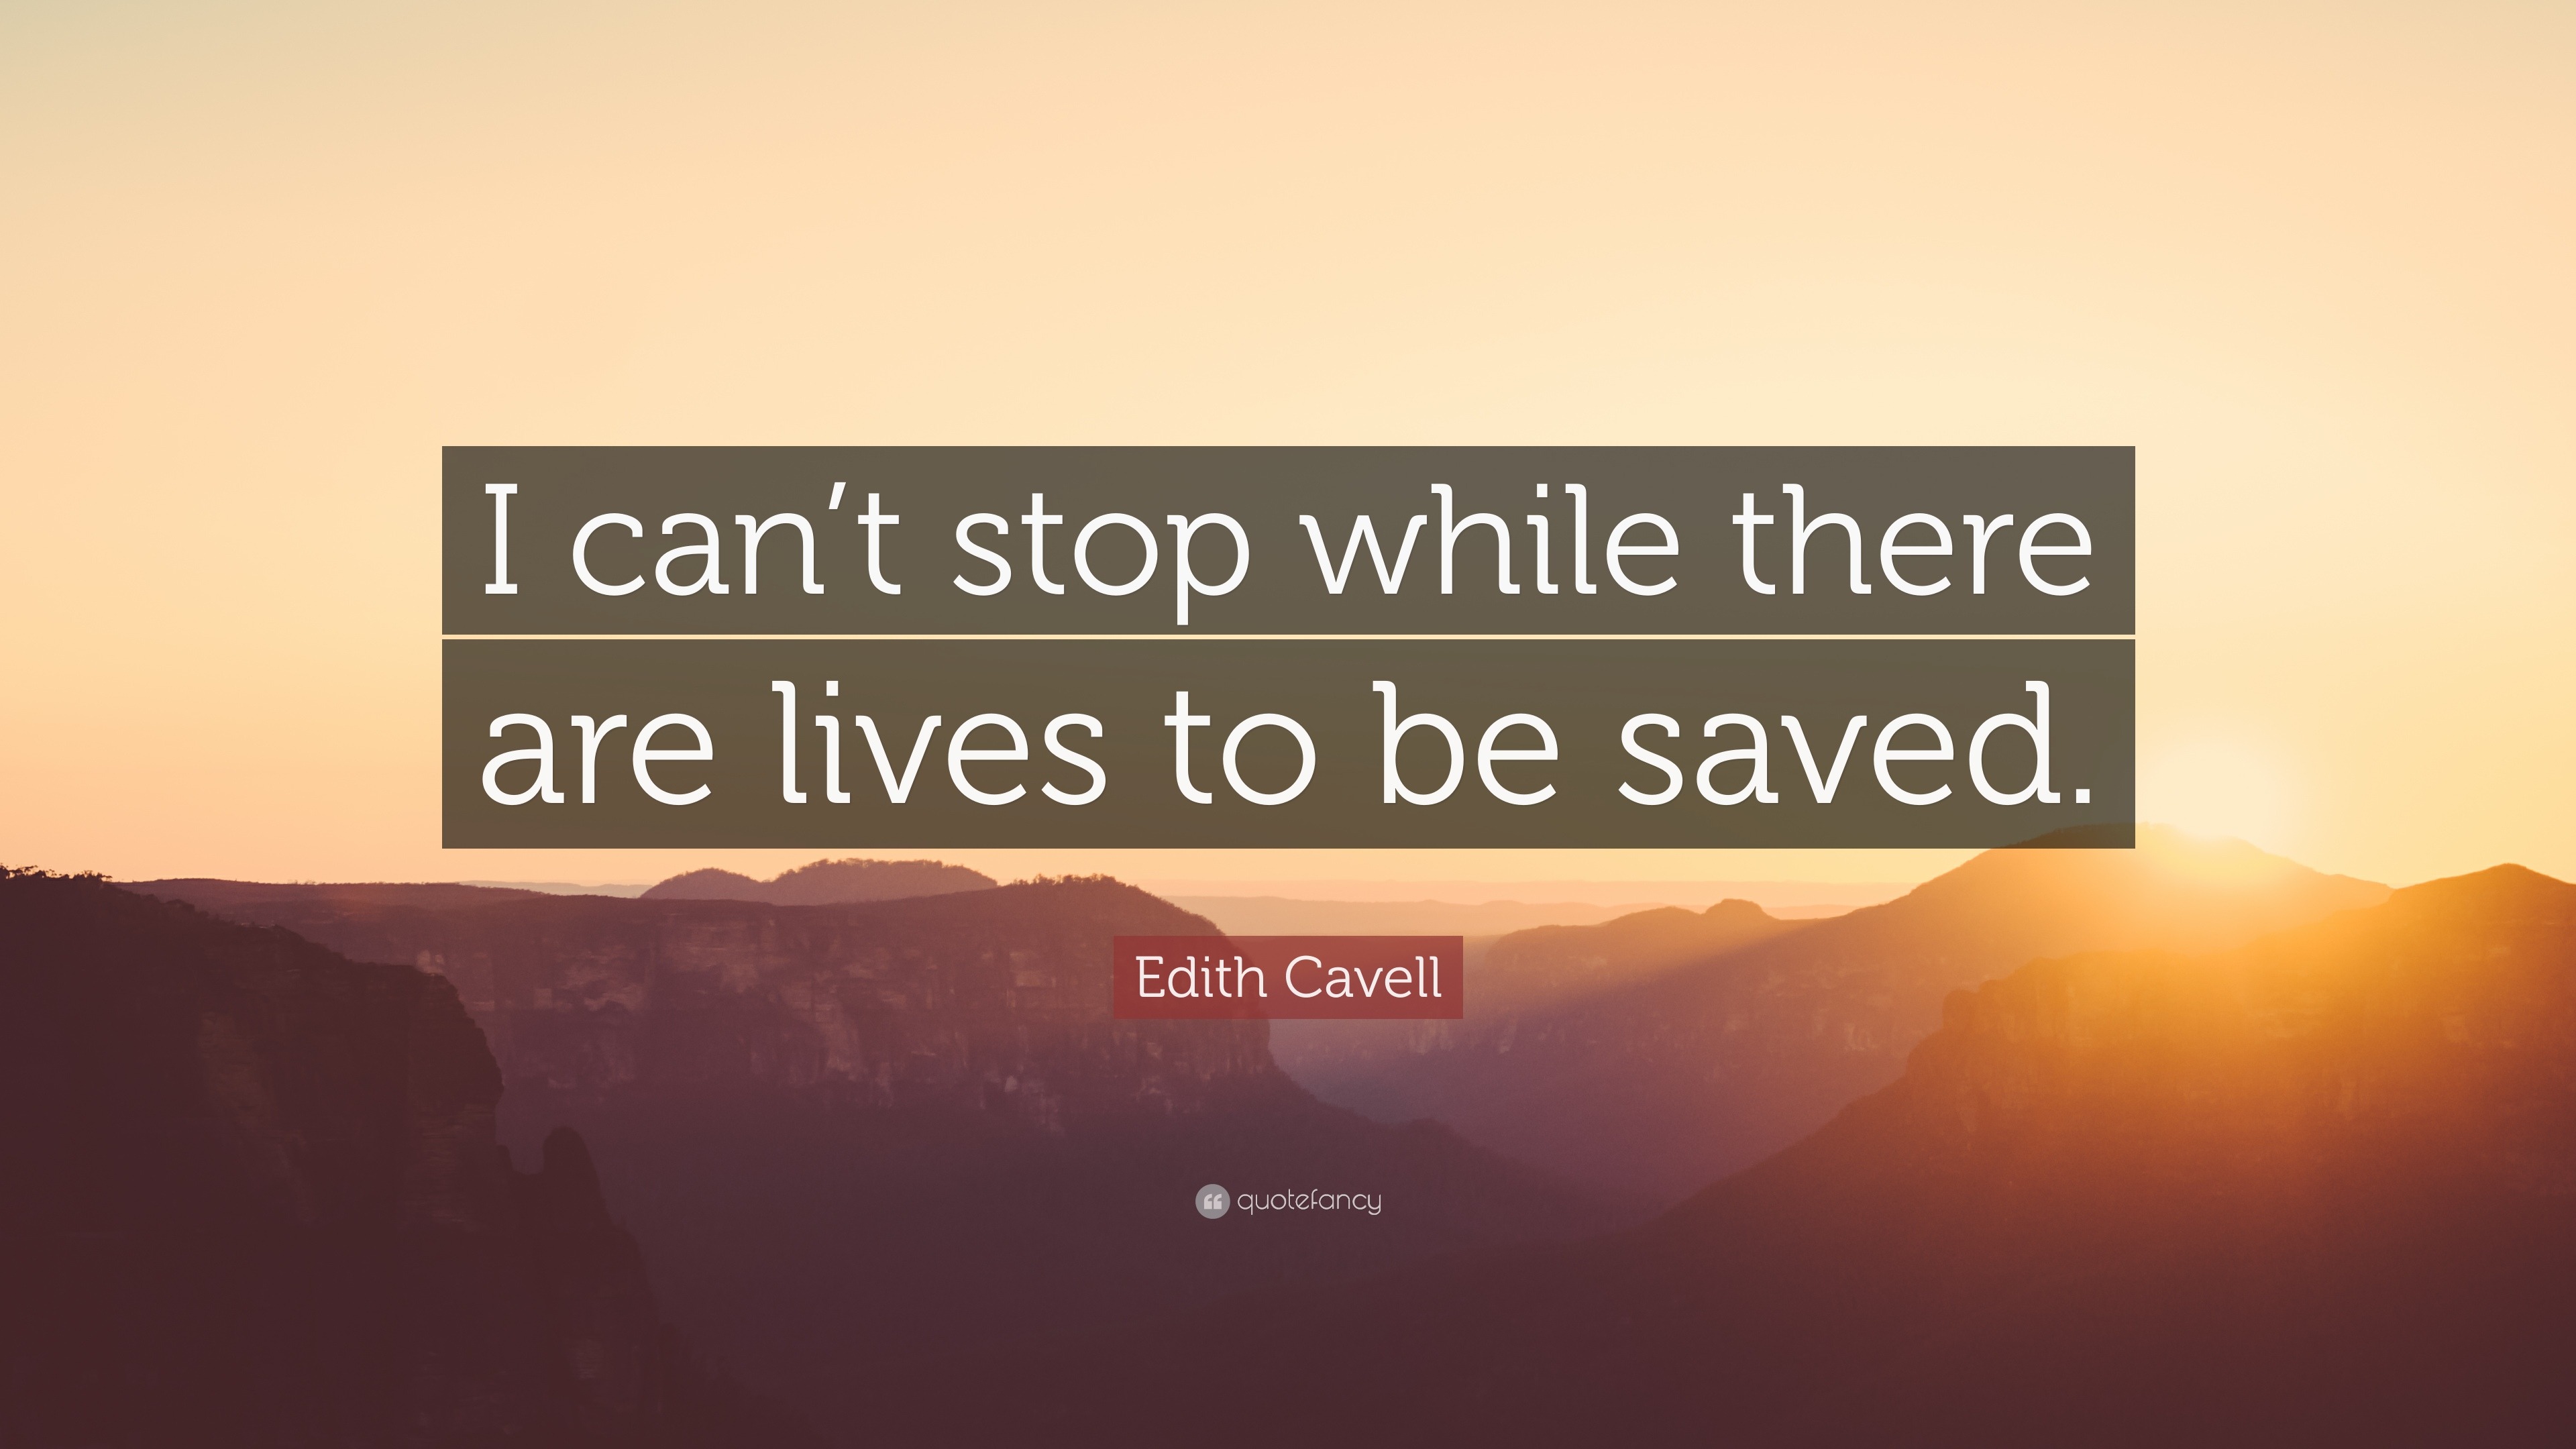 Top 6 Edith Cavell Quotes 2021 Update Quotefancy